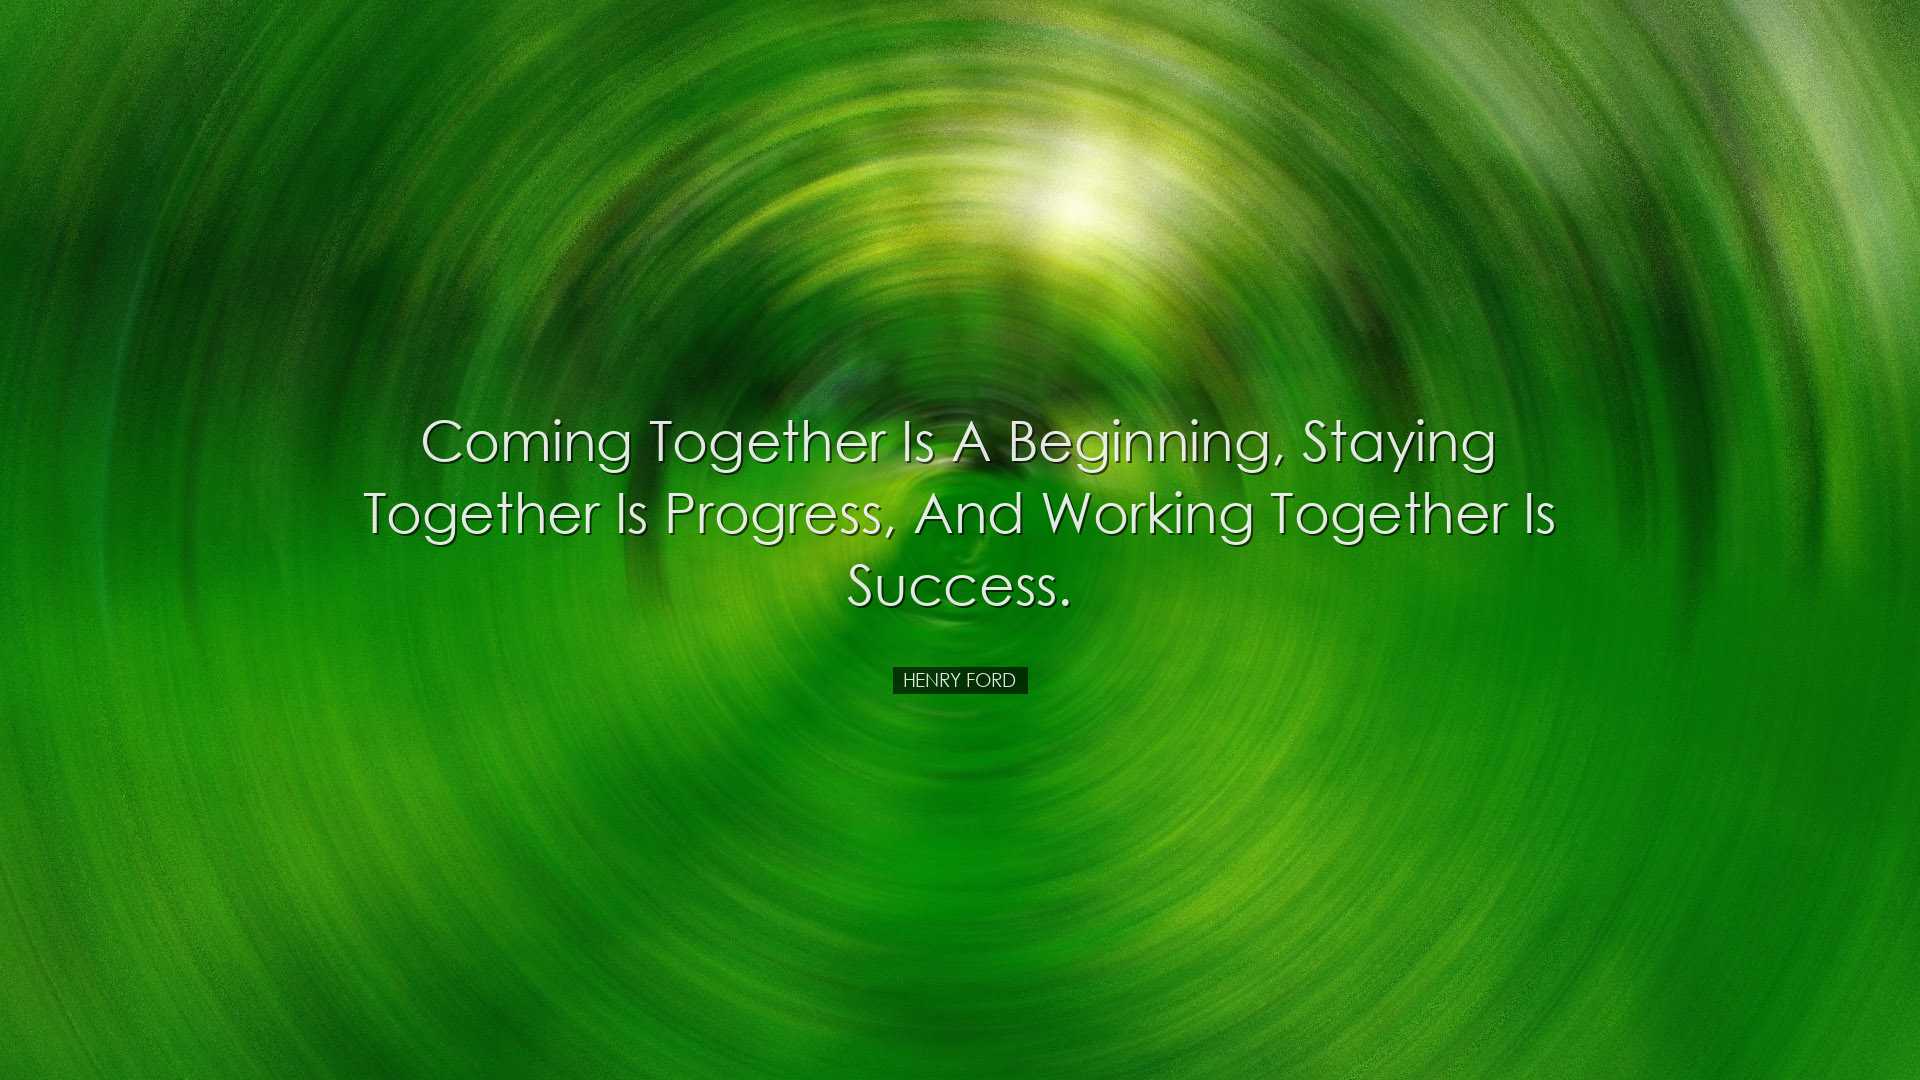 Coming together is a beginning, staying together is progress, and